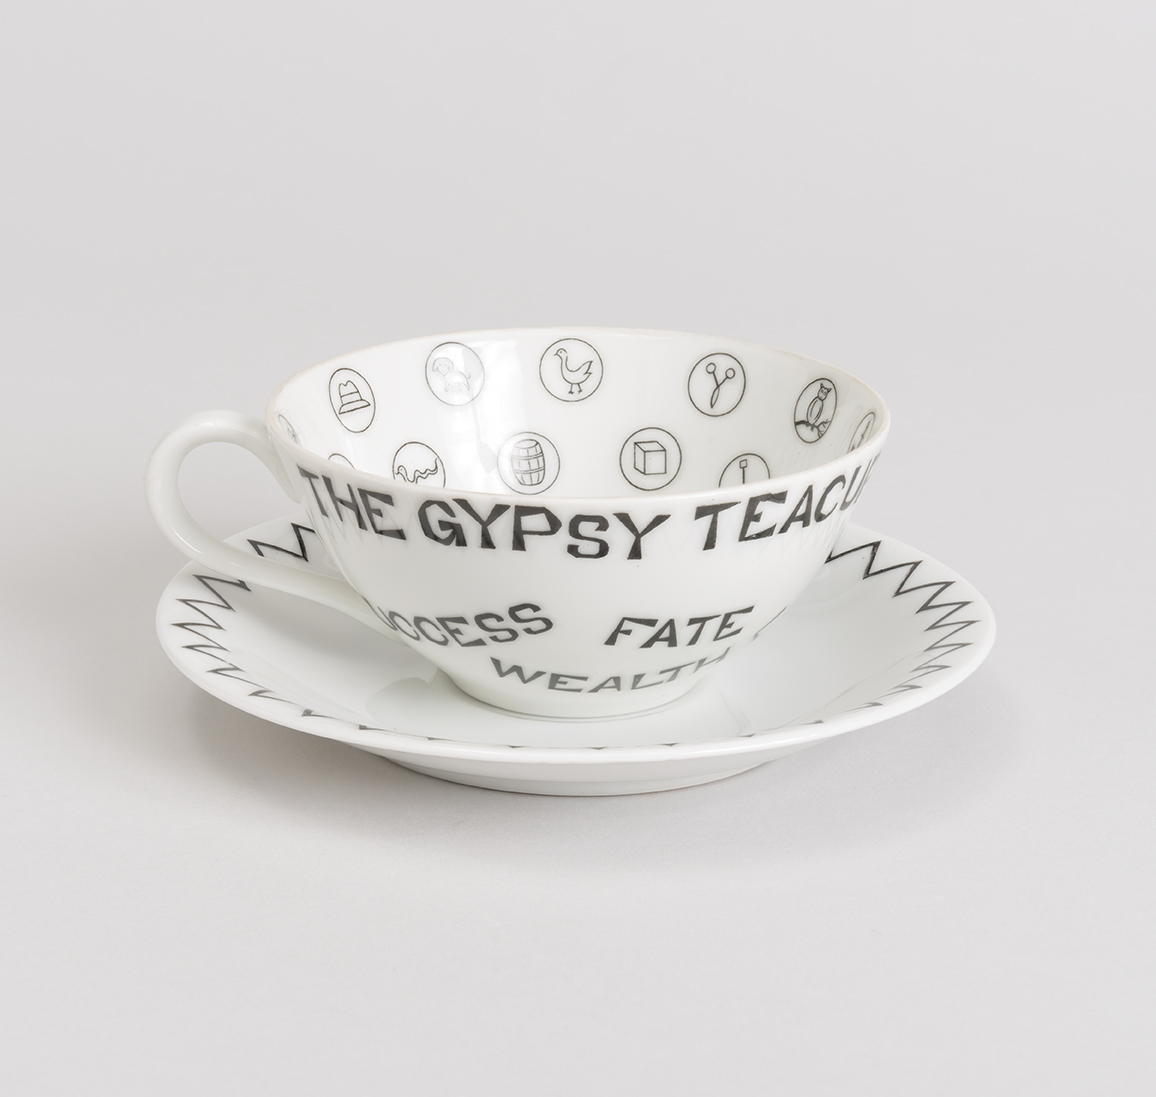 White teacup and saucer. On the exterior of the teacup are words in black such as 